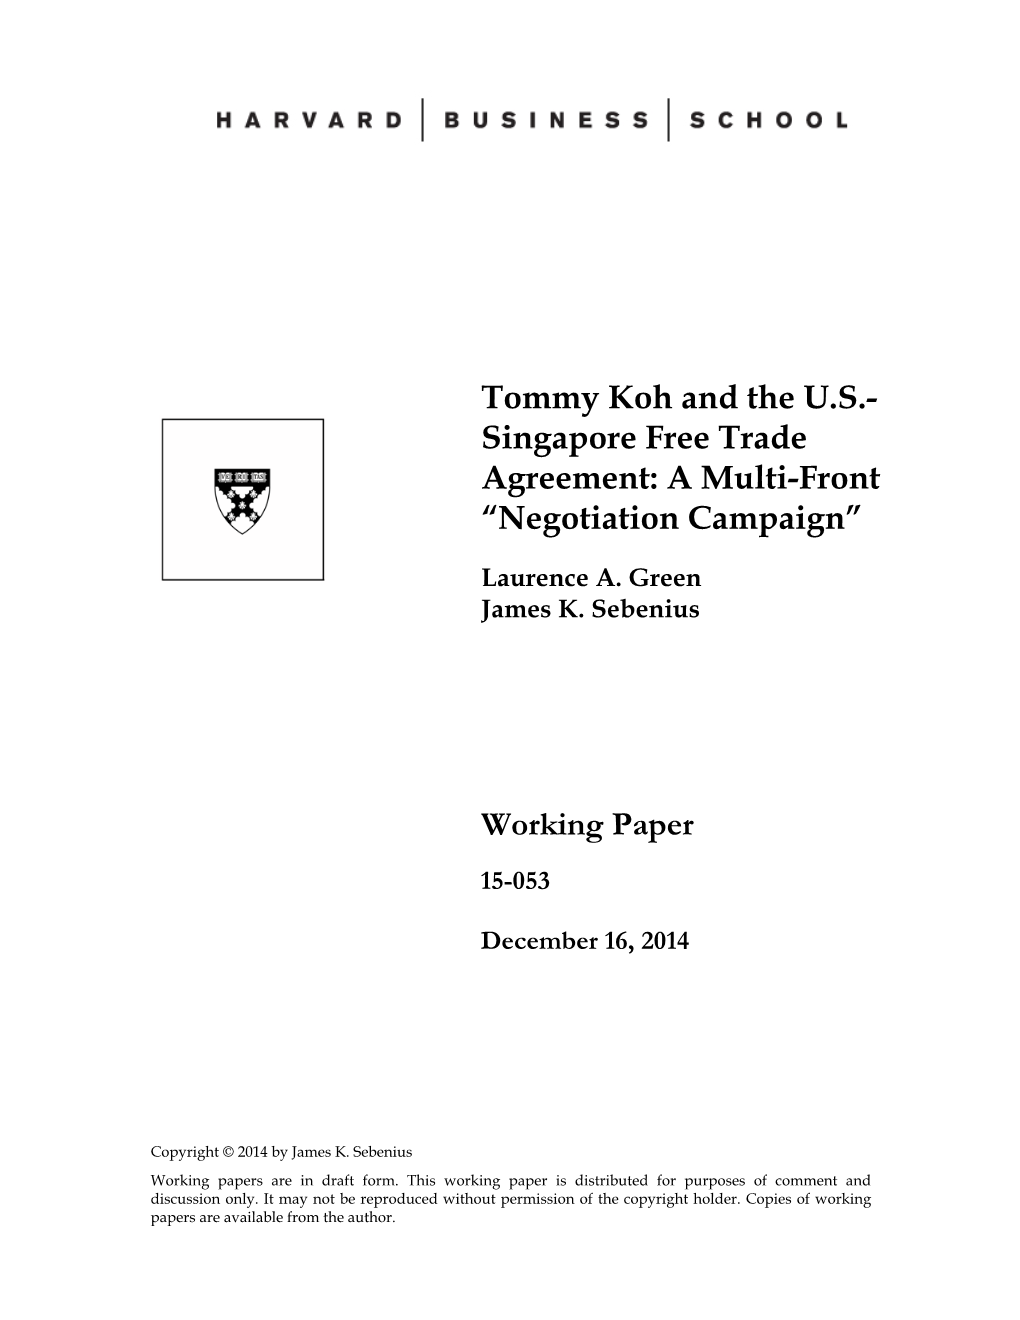 Tommy Koh and the US- Singapore Free Trade Agreement: a Multi-Front